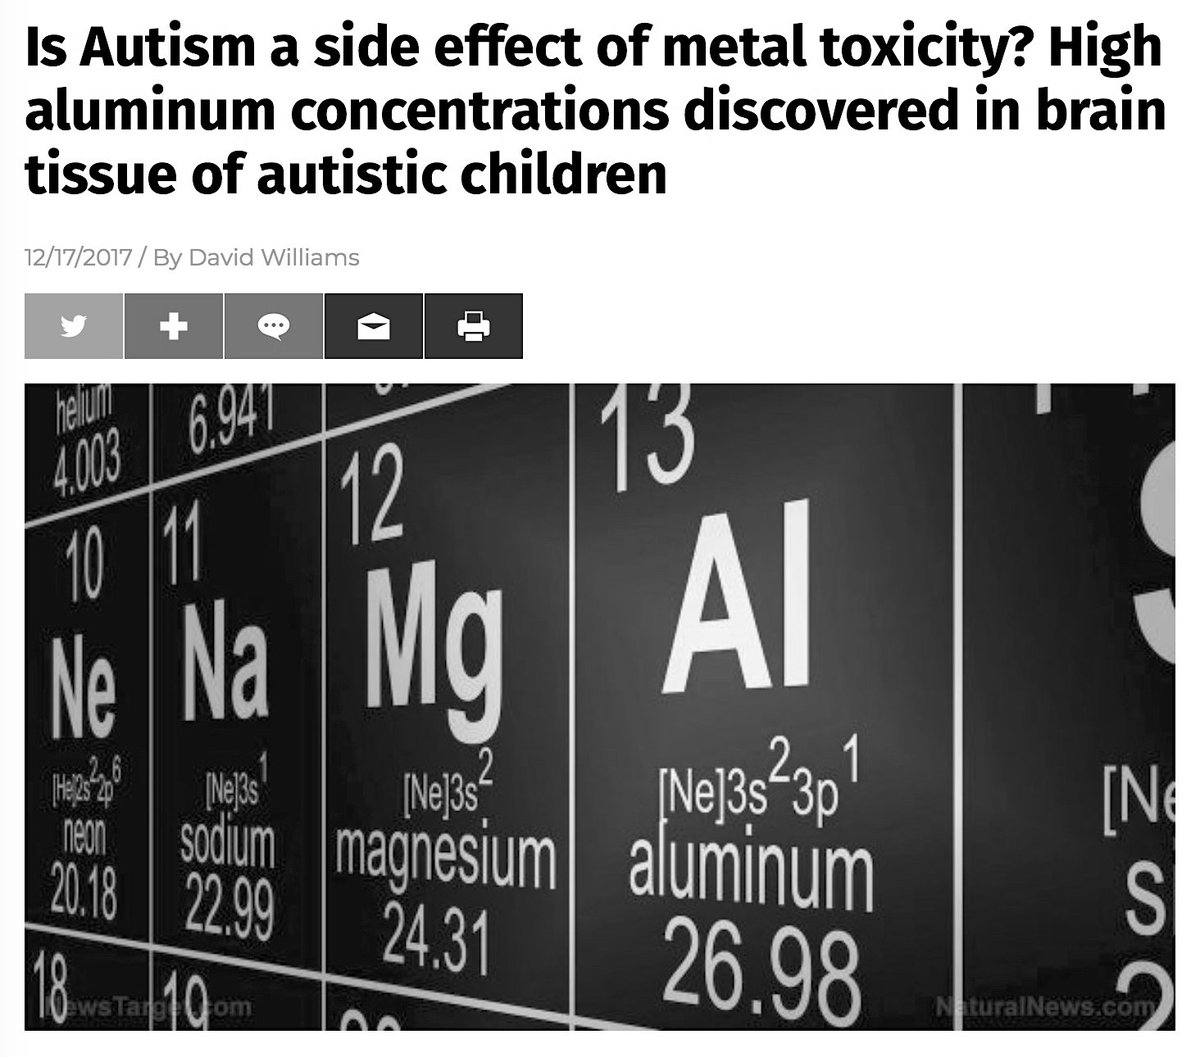 There Are No ‘Normal’ Levels Of Brain Aluminium. Its Presence In Brain Tissue, At Any Level, Could Be Construed As Abnormal.December 17, 2017 https://www.autismtruthnews.com/2017-12-17-is-autism-a-side-effect-of-metal-toxicity-high-aluminum-concentrations-discovered-brain-tissue.html #QAnon  #Vaccine  #Autism  #MetalToxicity  @potus